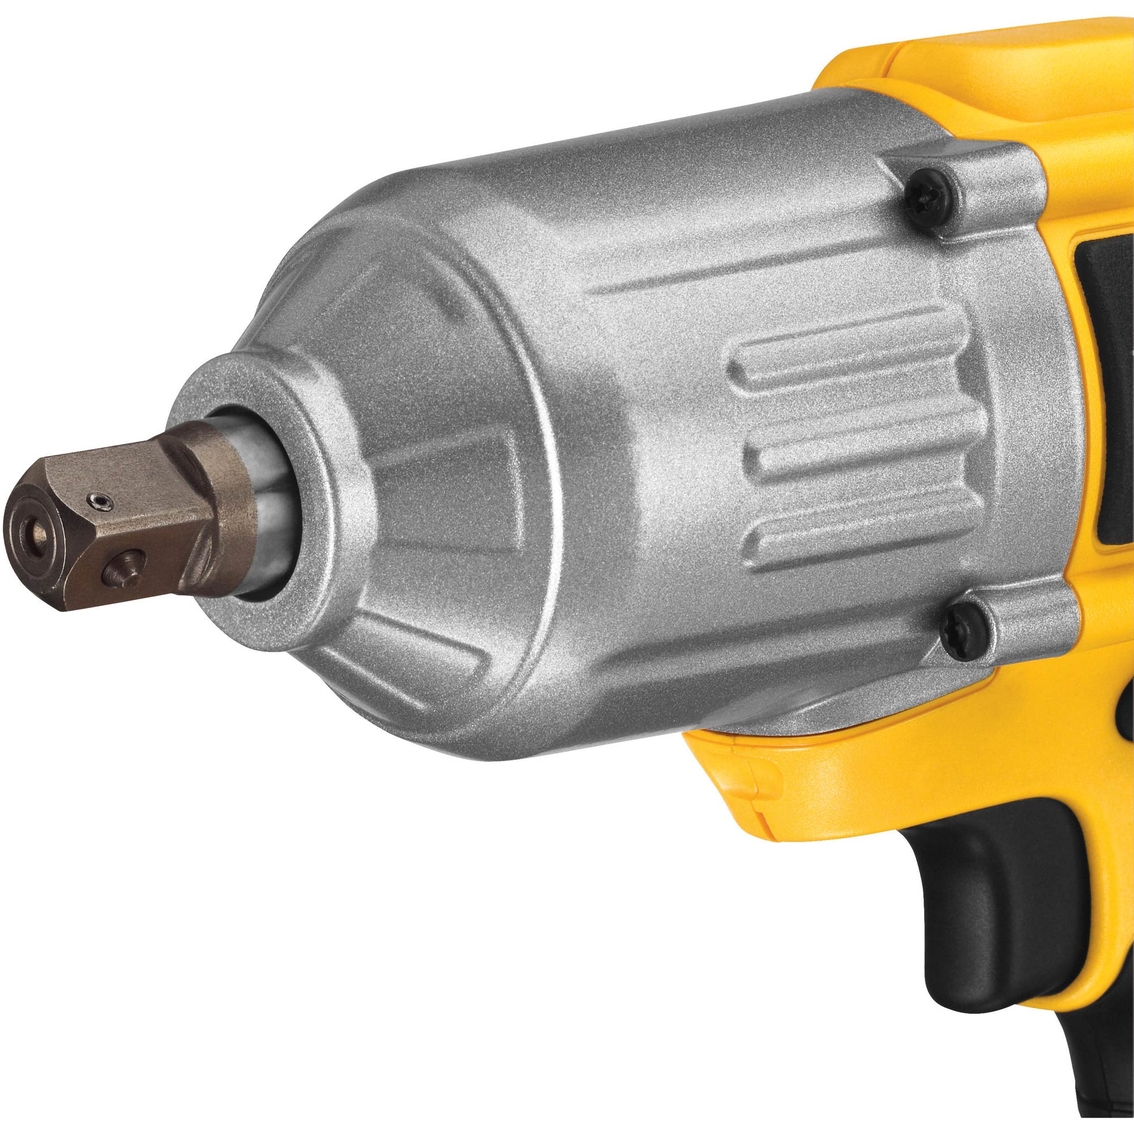 DeWalt DCF889M2 20V MAX* 1/2 In. High Torque Impact Wrench Kit - Image 8 of 9